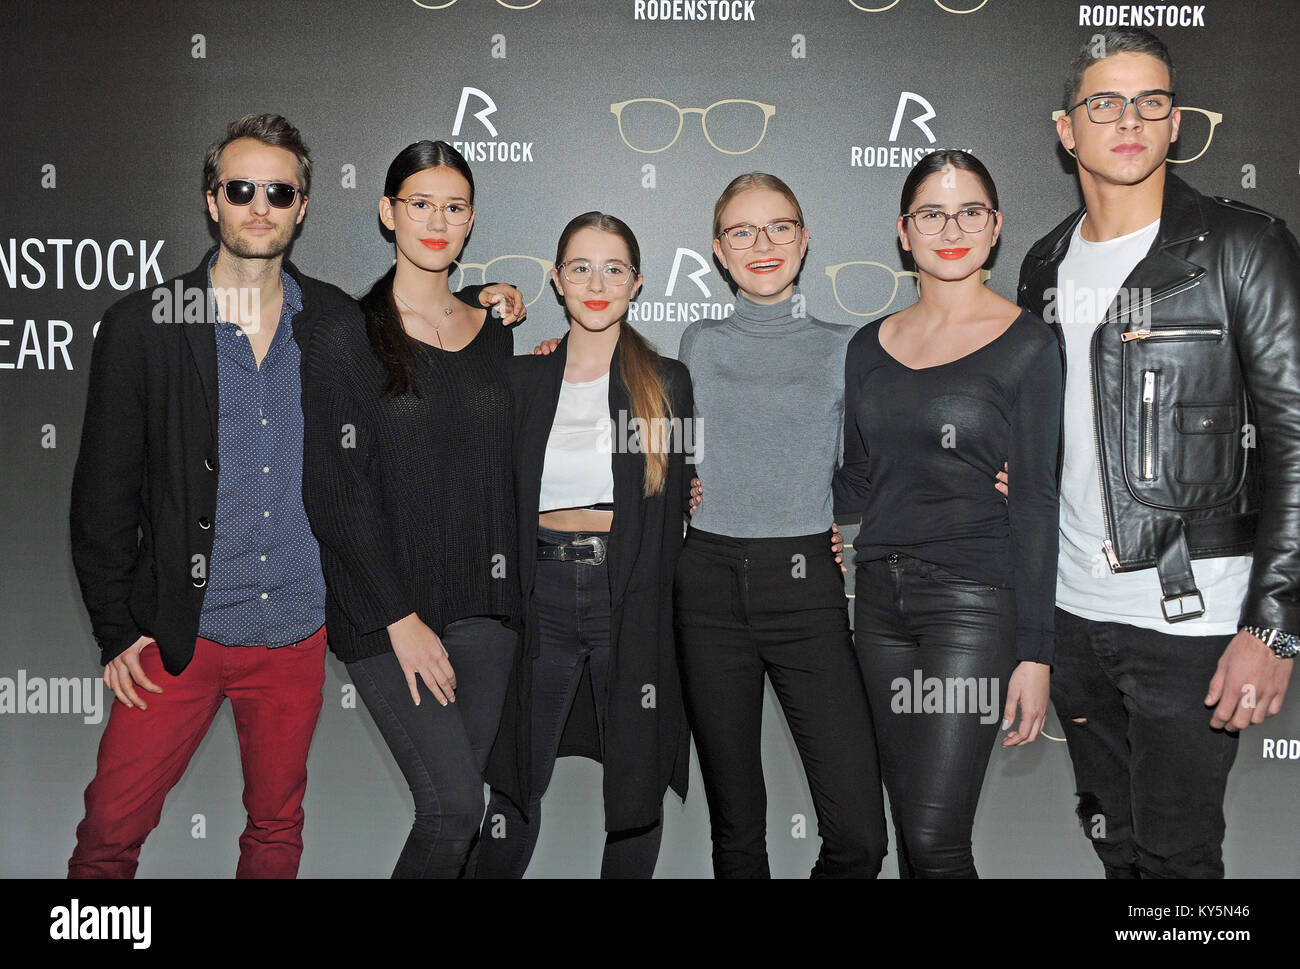 Munich, Germany. 12th Jan, 2018. Oscar Lauterbach, son of Heiner Lauterbach (v-l), Isablla Ahrens, daughter of actress Mariella Ahrens, Enya Elstner, youngest daughter of Frank Elstner, Milana von Pfuel, daughter of Stefanie von Pfuel, Lucia Strunz, daughter of Claudia Effenberg and Lex Tyger Lobringer, footballer, wearing new designs at the Rodenstock Eyewear Show 2018 at Haus der Kunst in Munich, Germany, 12 January 2018. Credit: Ursula Düren/dpa/Alamy Live News Stock Photo